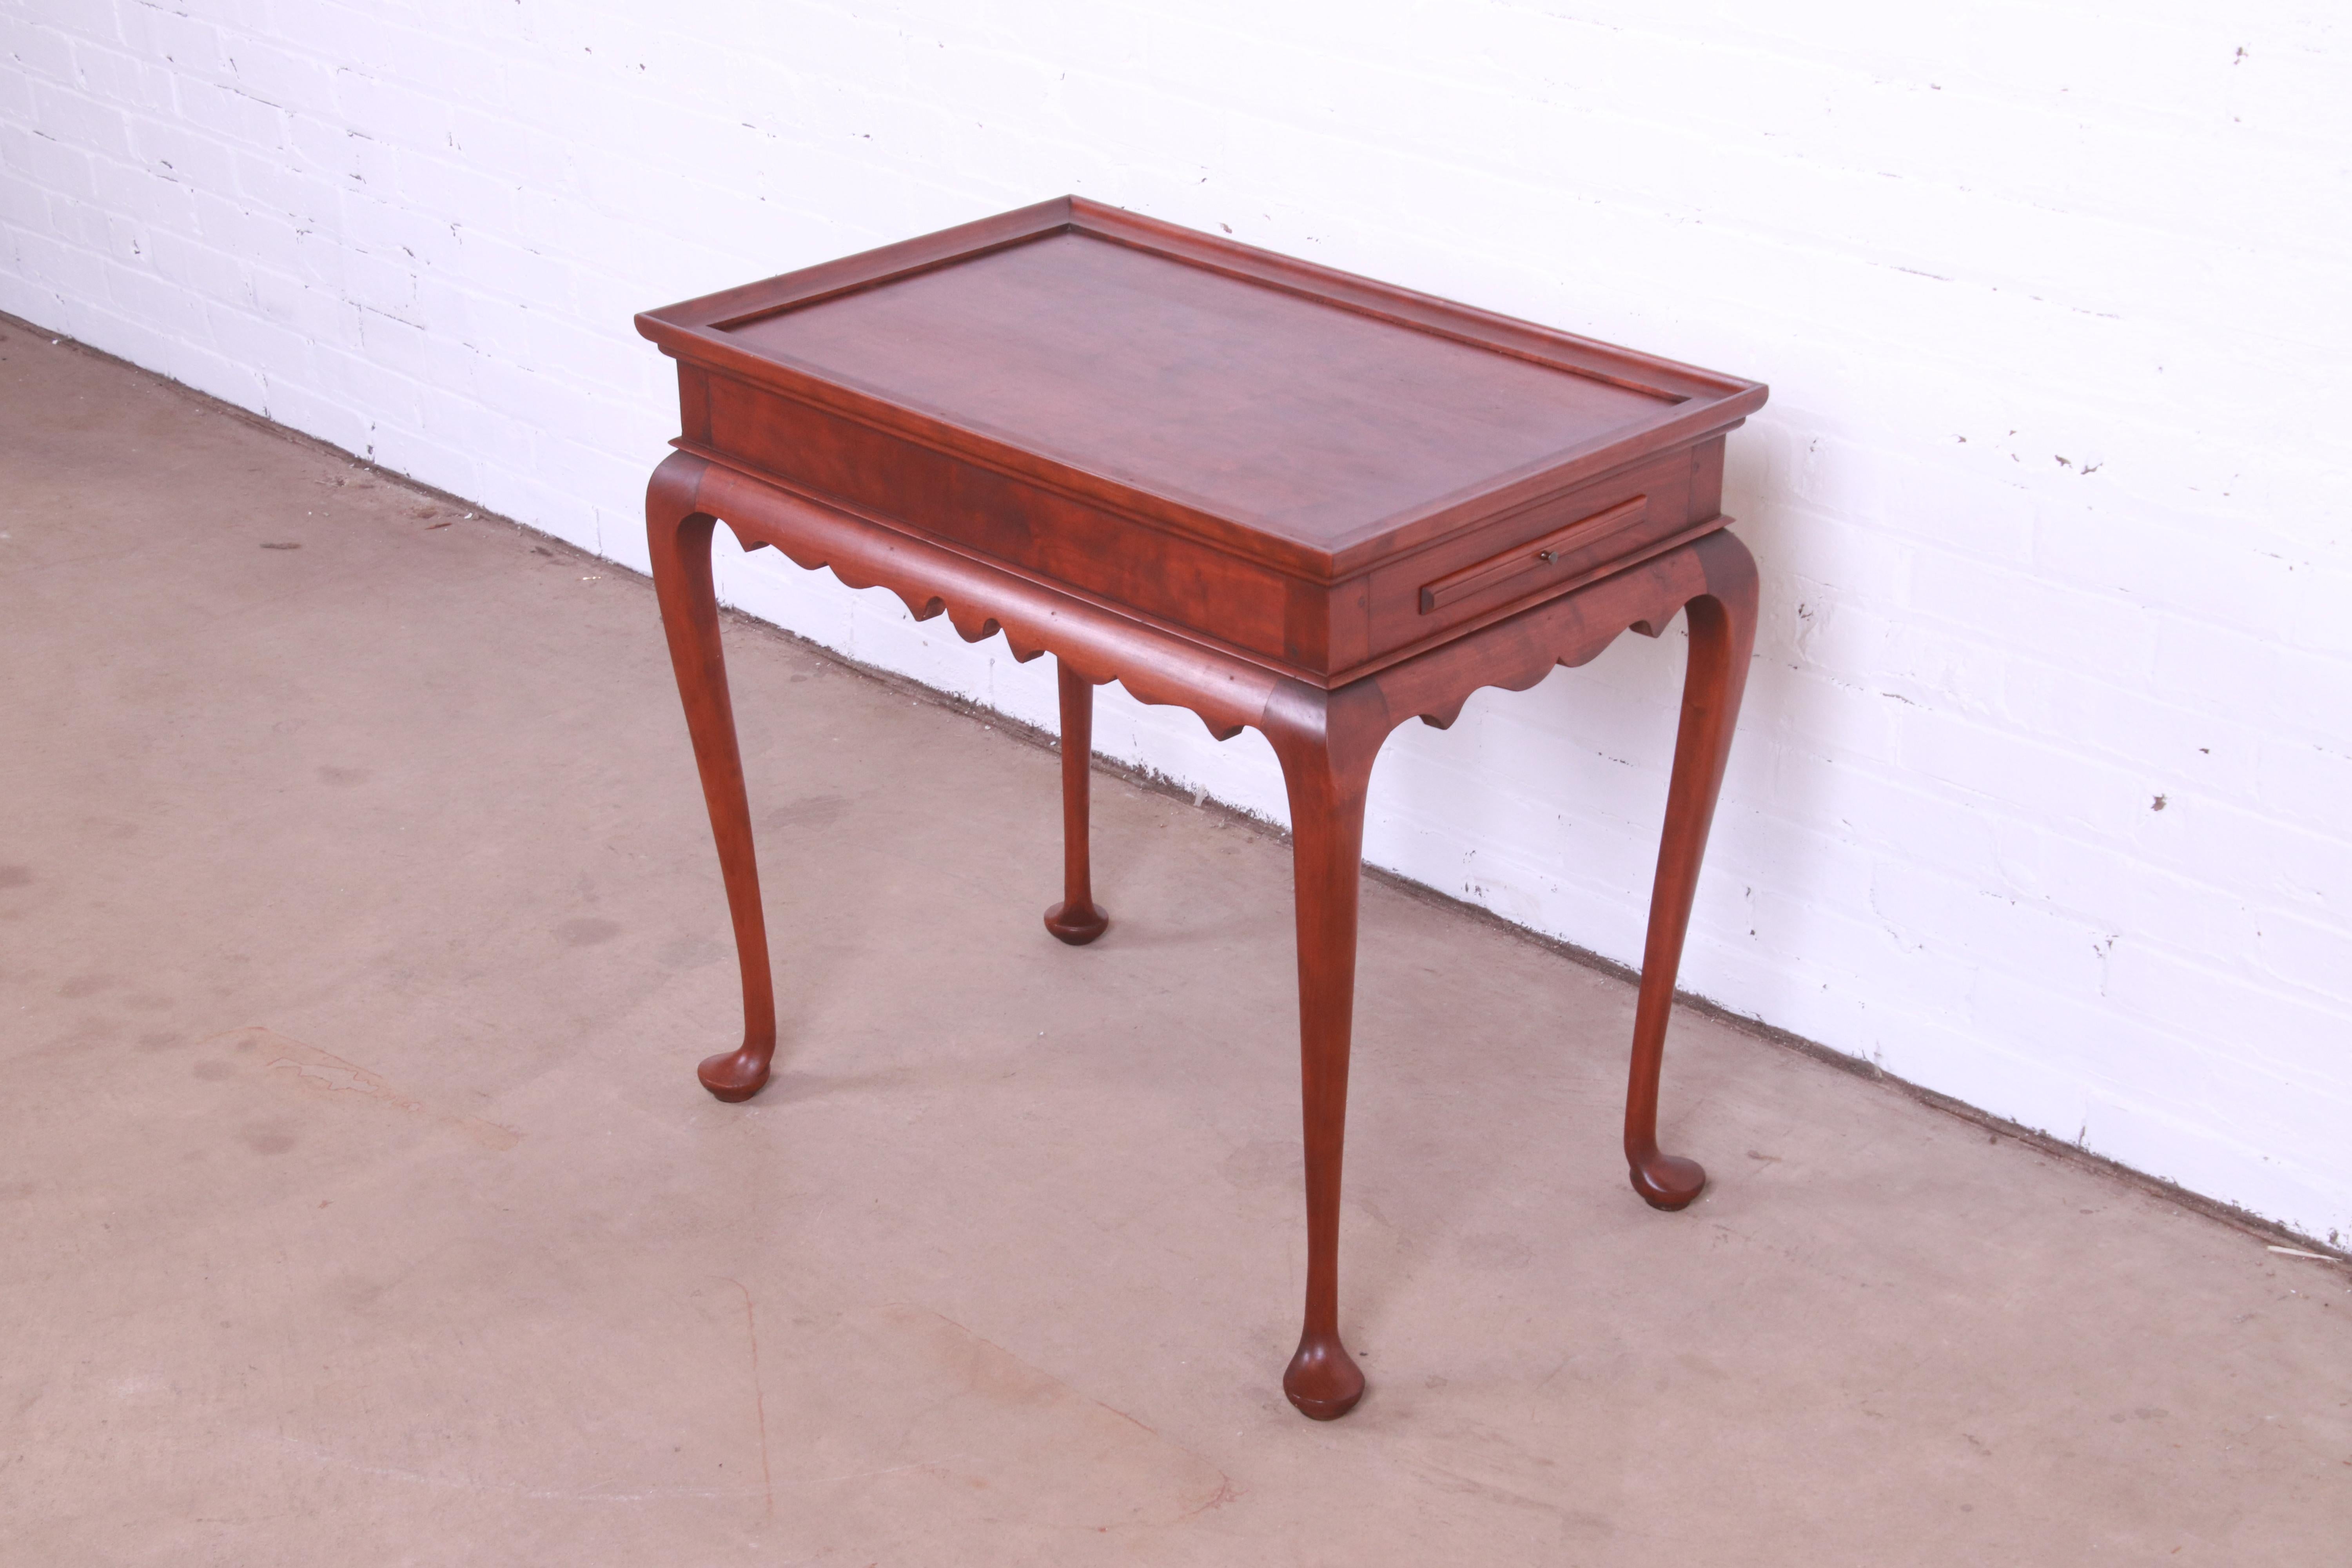 A gorgeous traditional Queen Anne cherry wood tea table or occasional side table

By Eldred Wheeler

USA, 20th century

Measures: 28.5